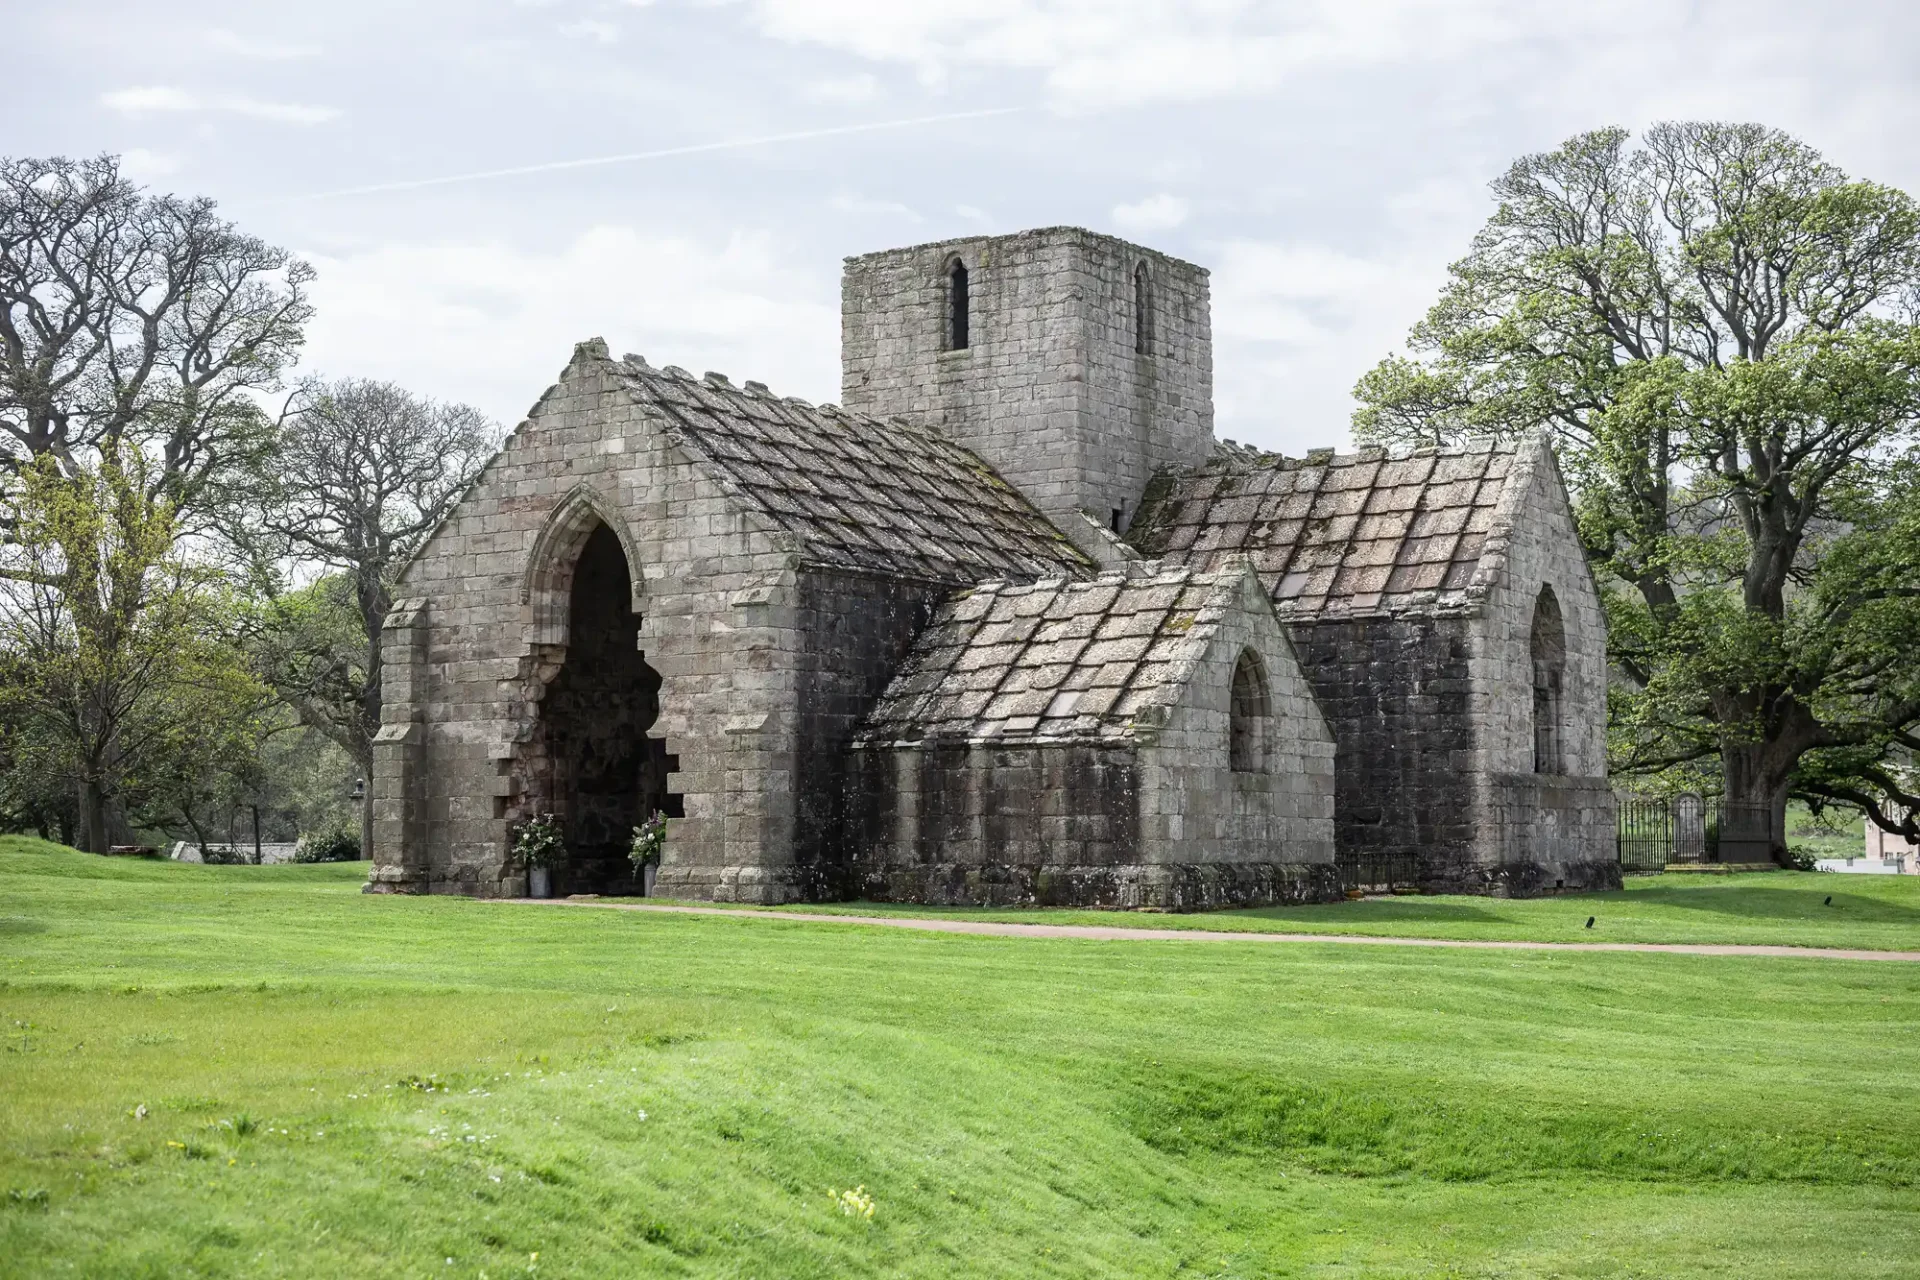 Old stone church surrounded by lush green grass and trees. The sky is cloudy. The building shows signs of age and wear.